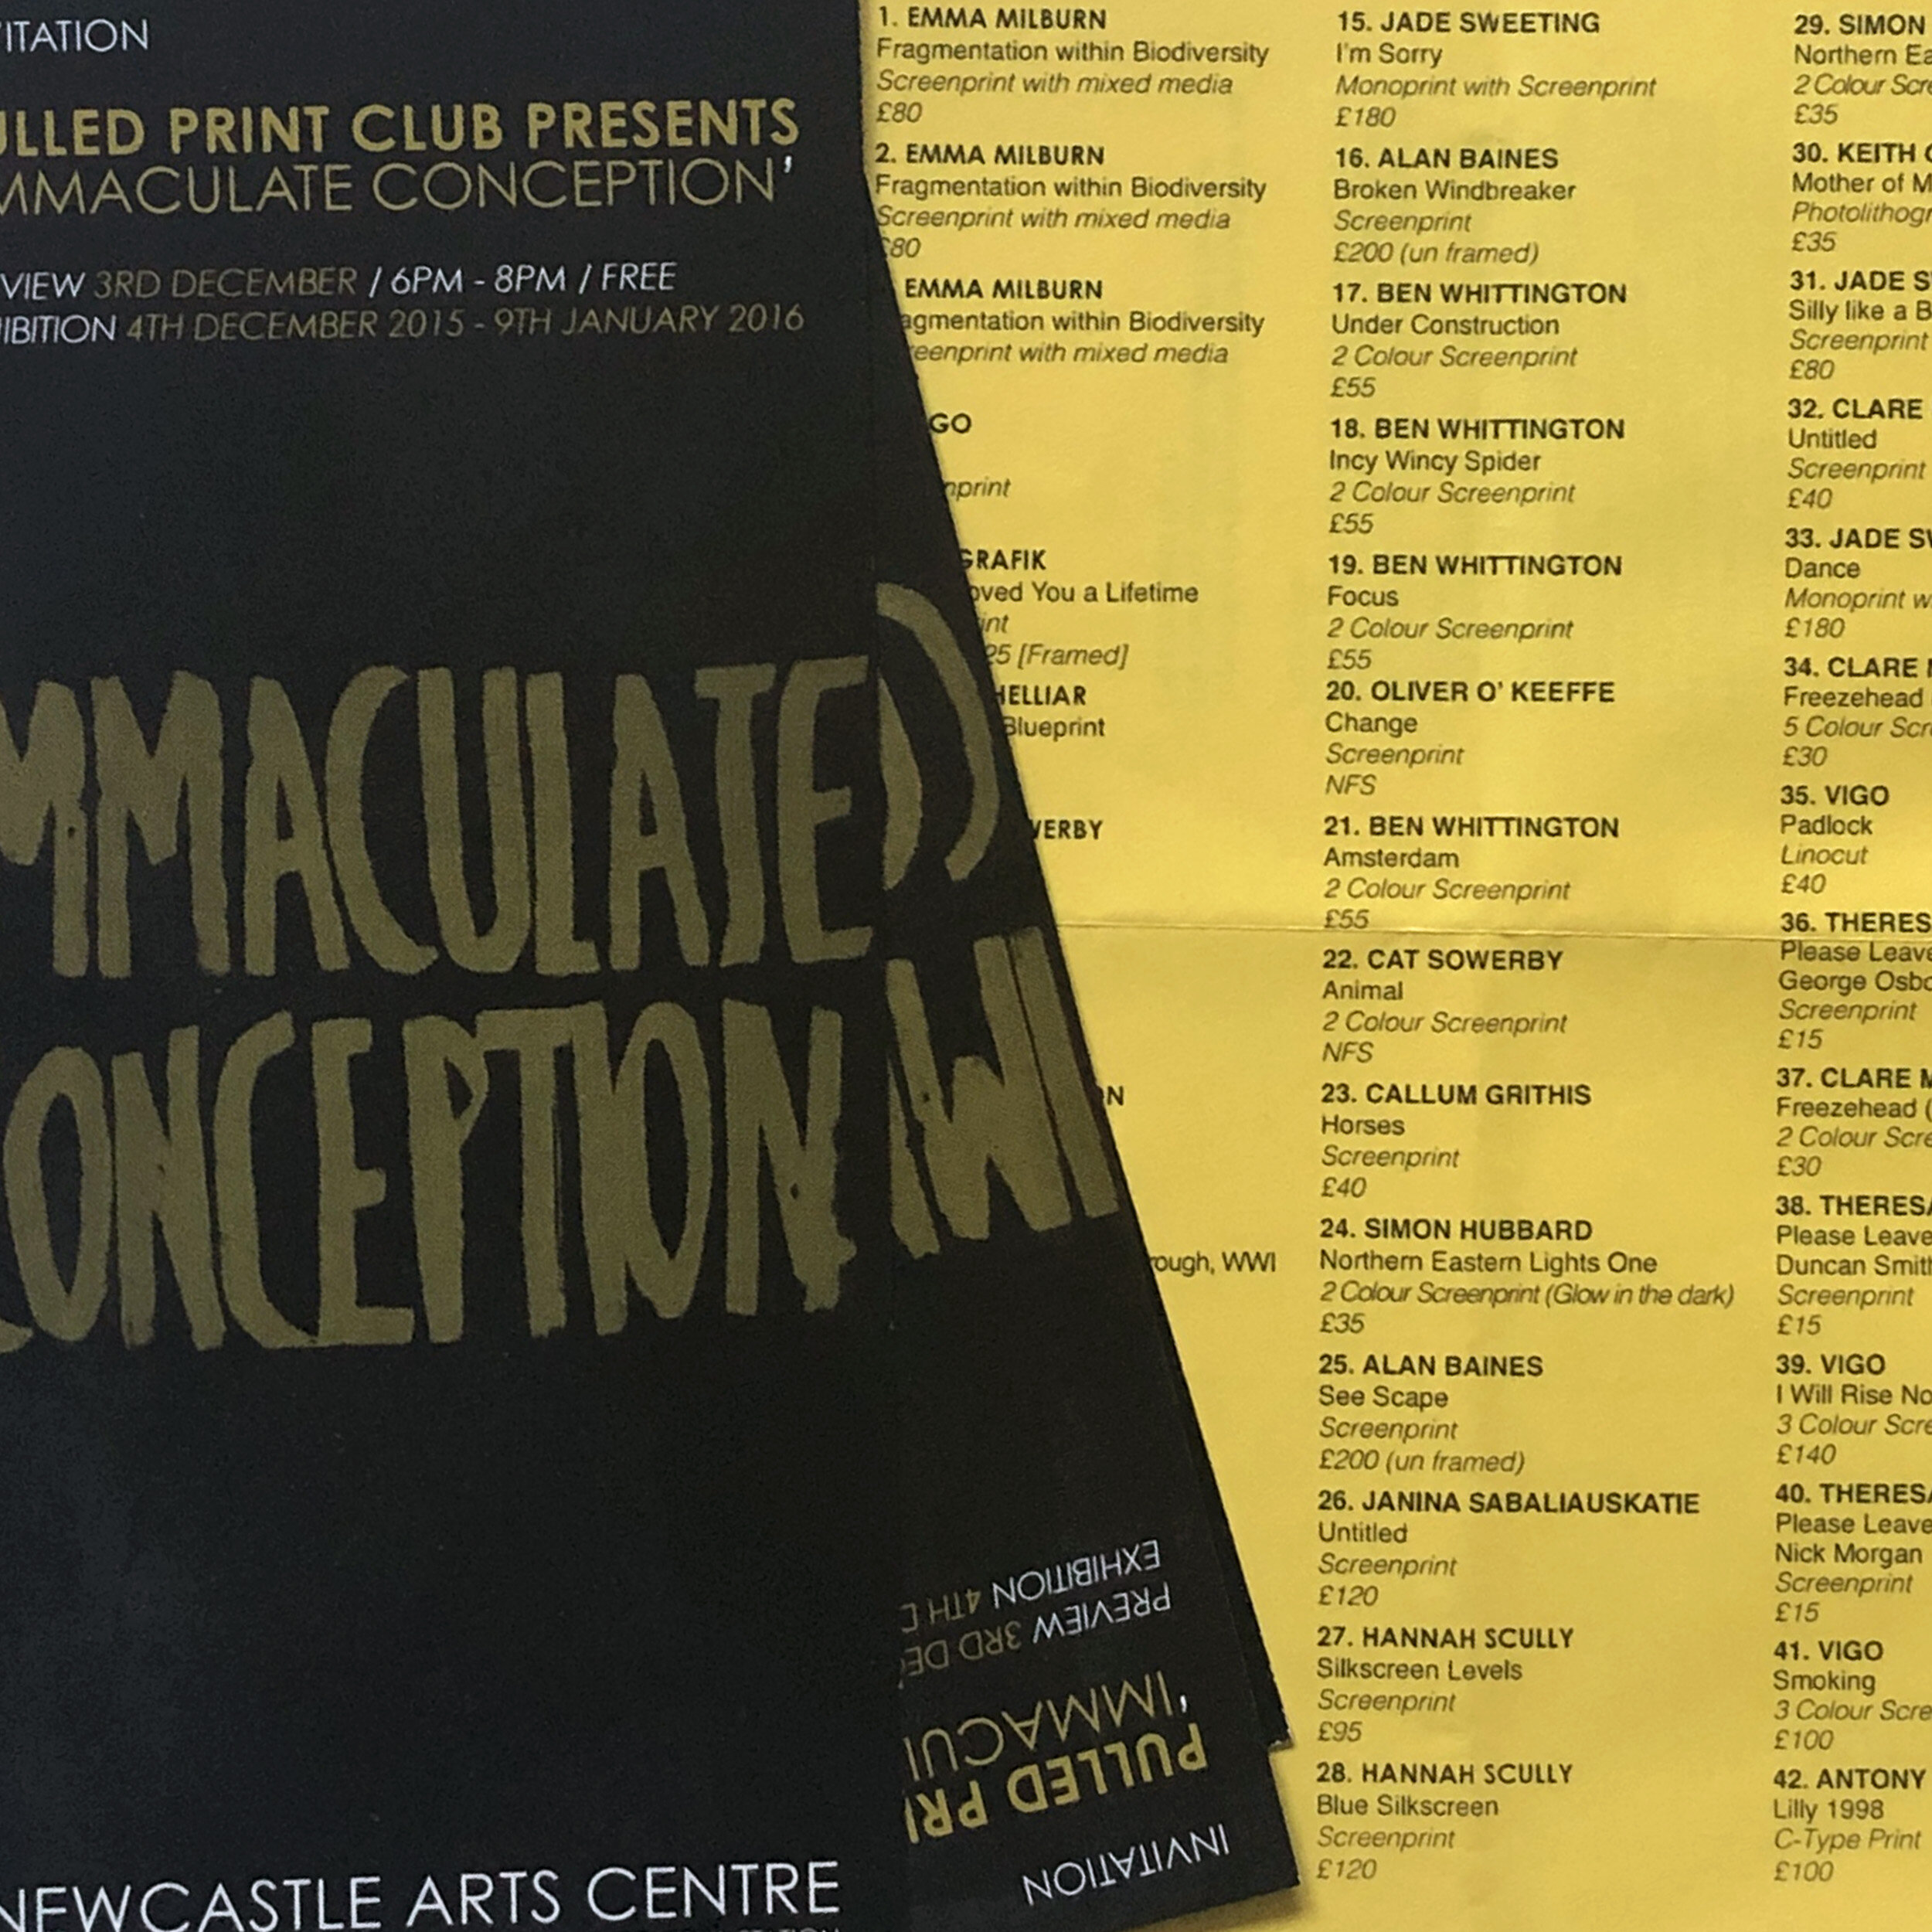 Immaculate Conception: Newcastle Arts Centre 2015/16